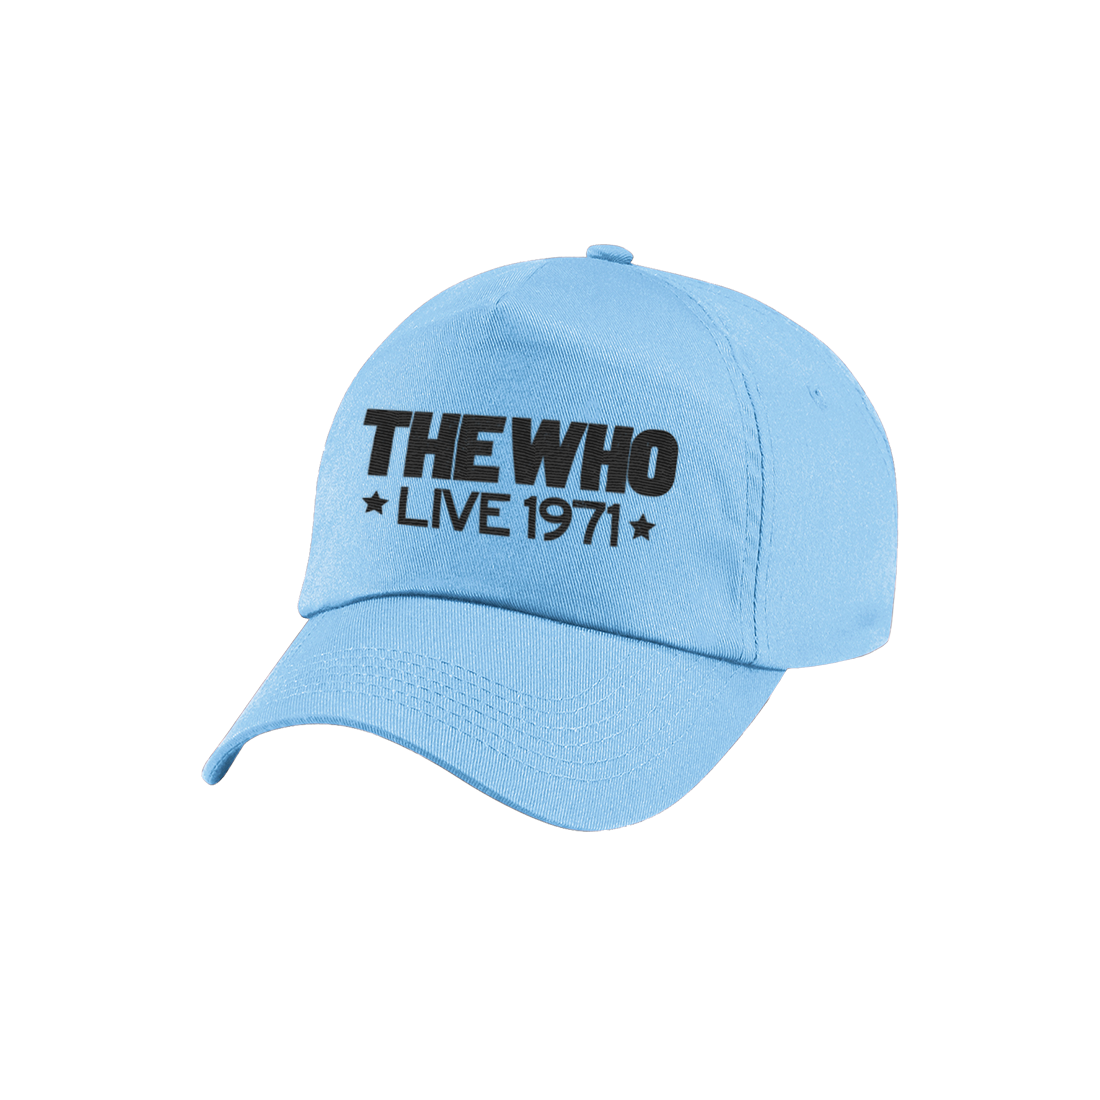 The Who - Live 1971 Hat